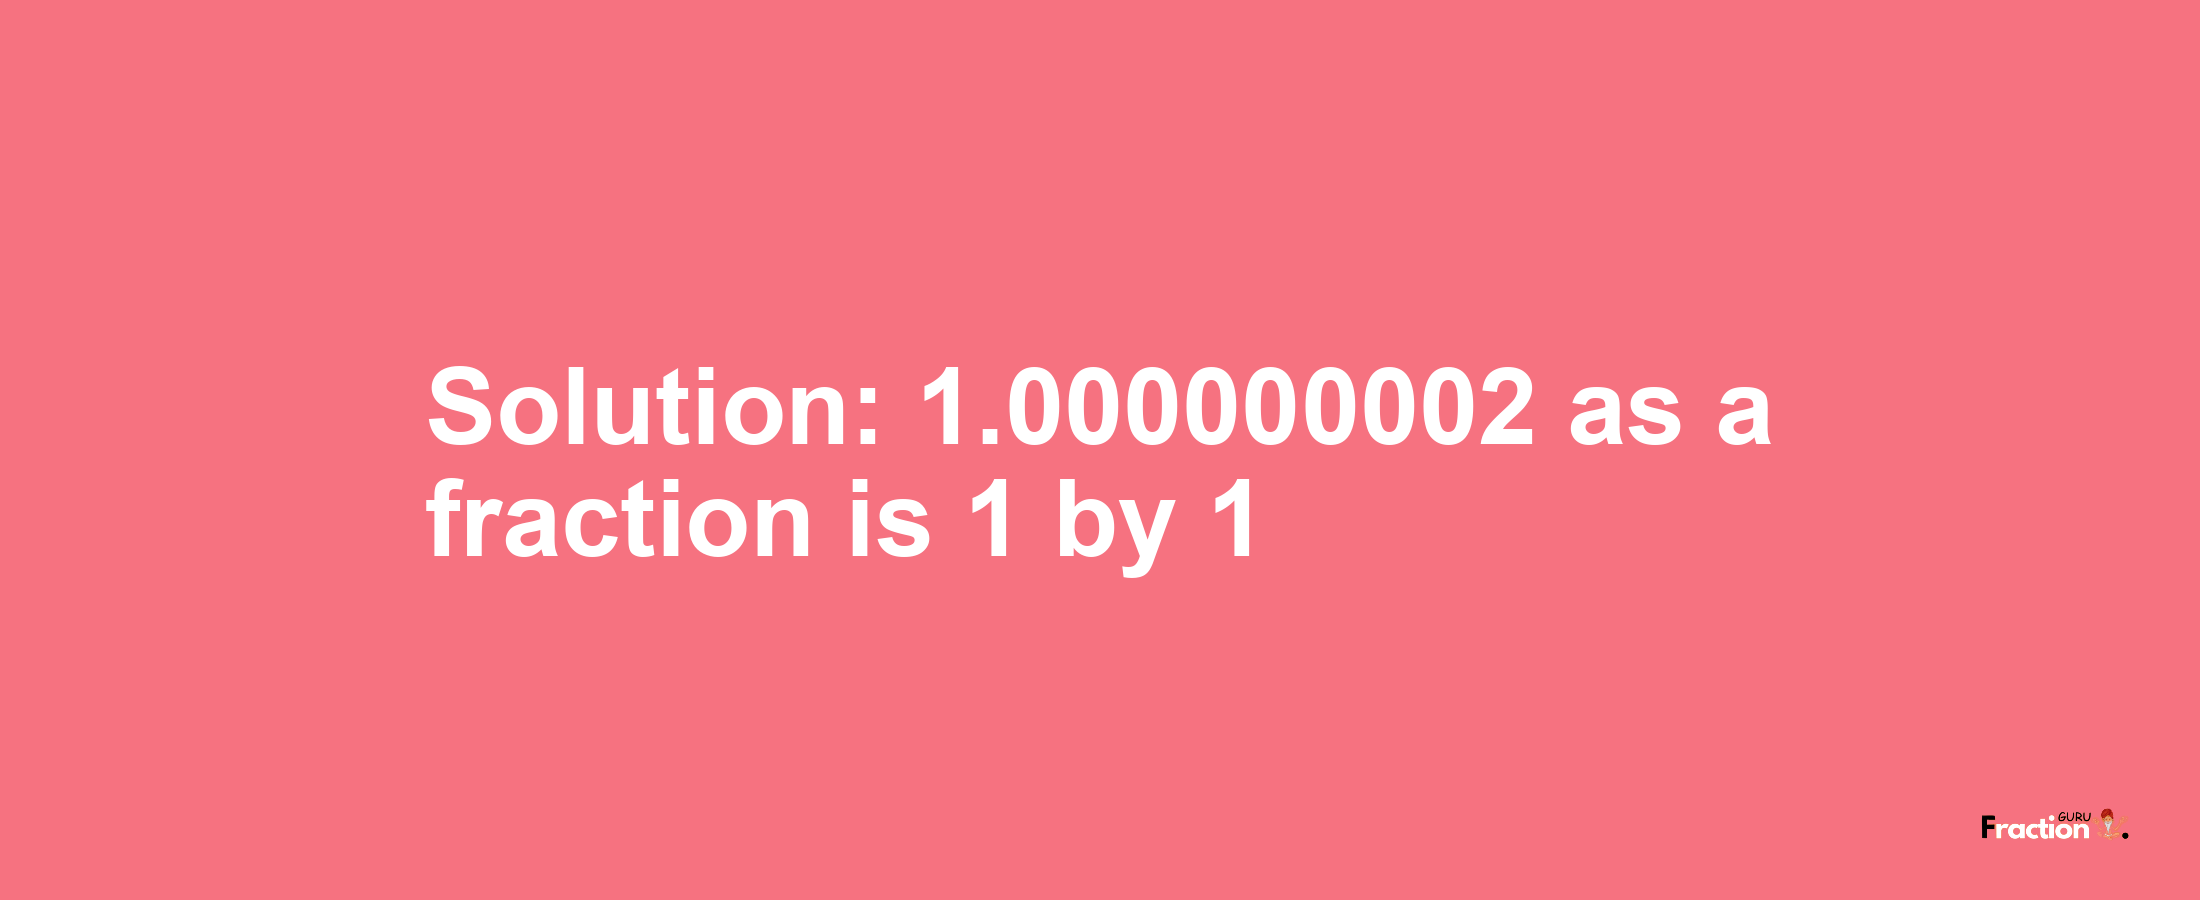 Solution:1.000000002 as a fraction is 1/1